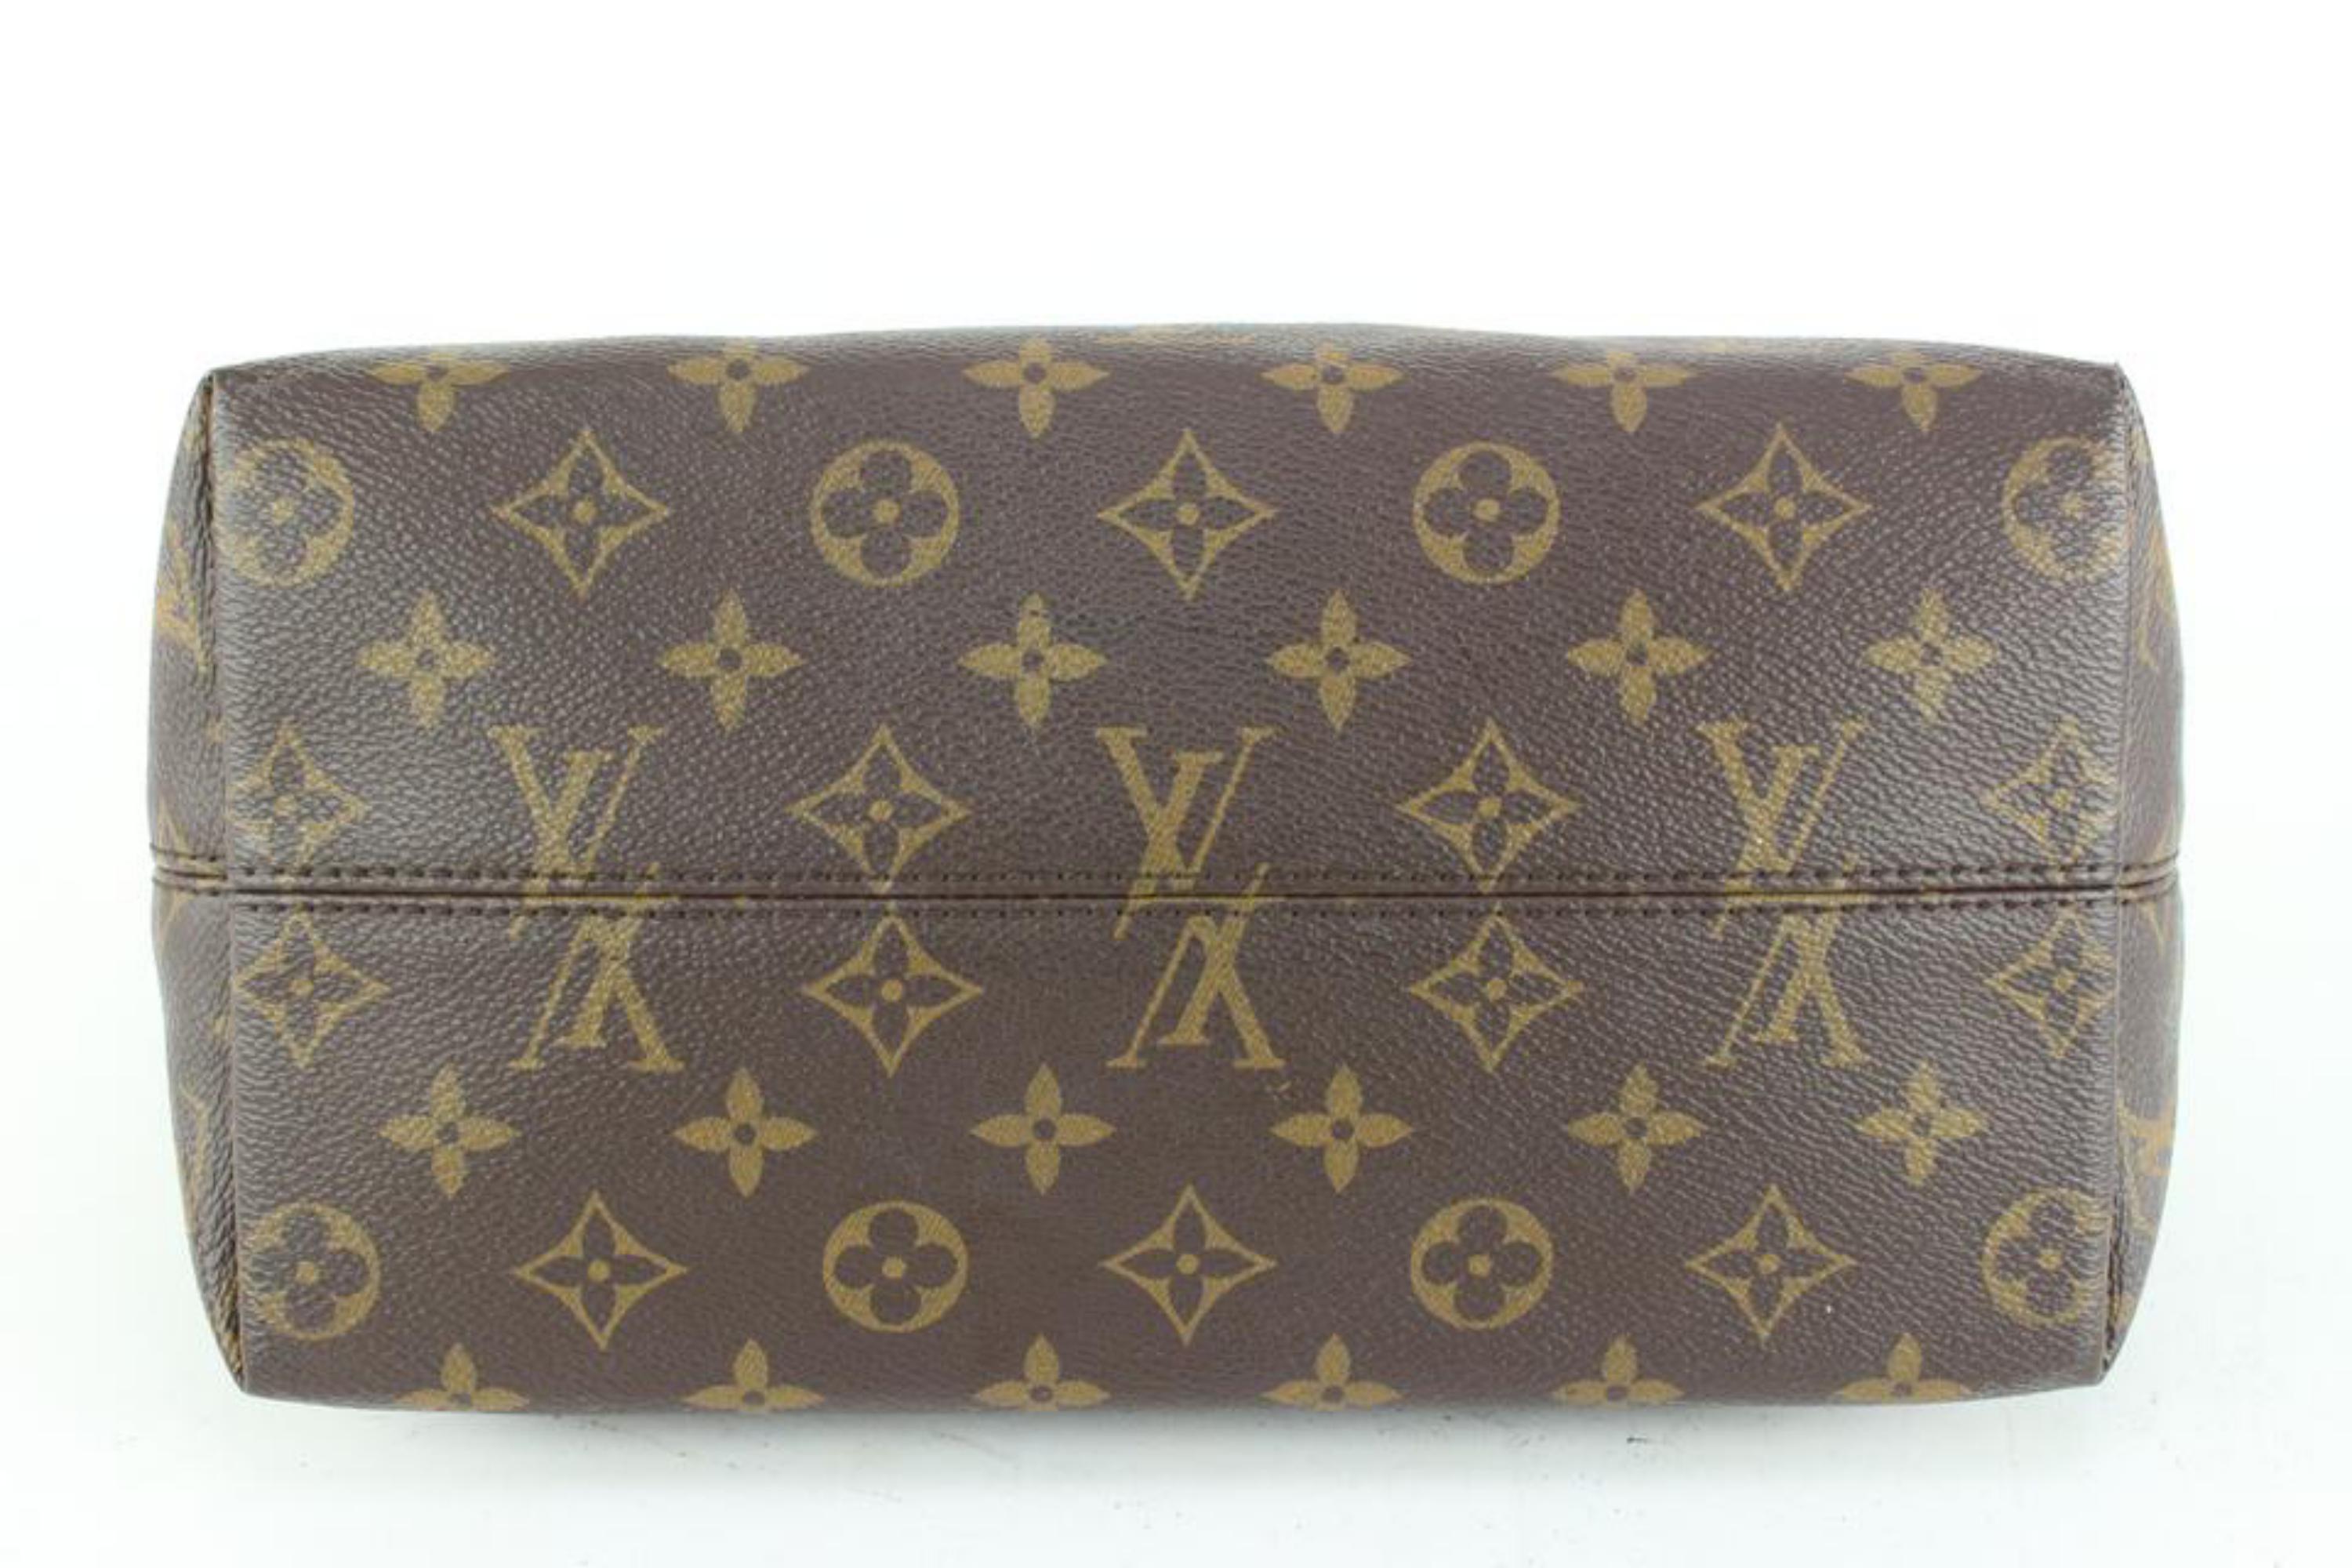 Louis Vuitton Discontinued Monogram Iena PM Zip Tote Bag 86lk67s In Fair Condition For Sale In Dix hills, NY